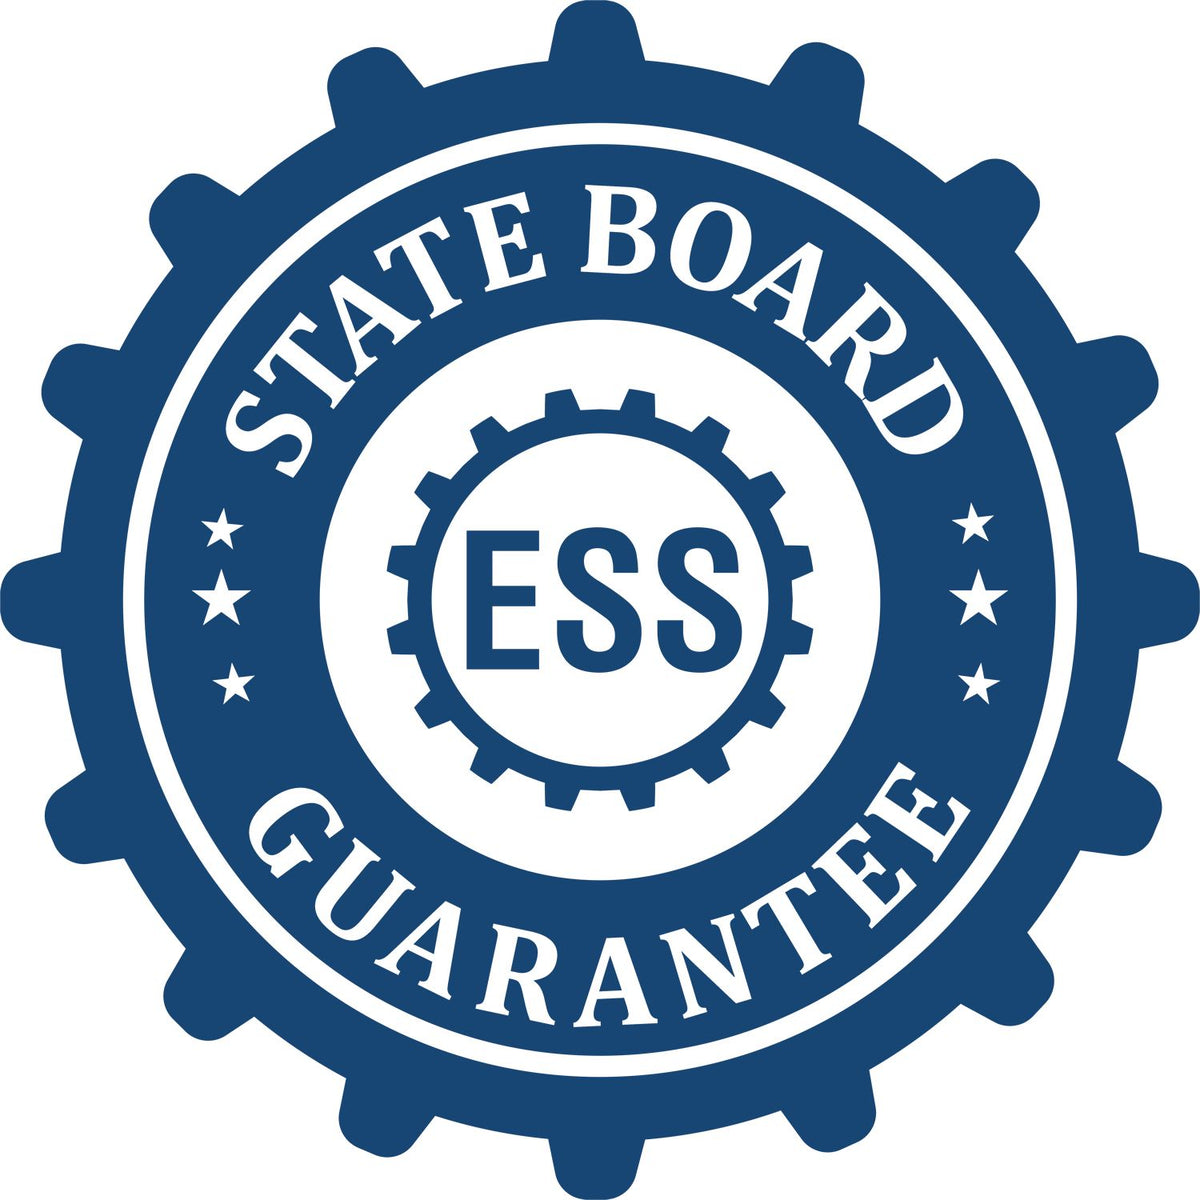 An emblem in a gear shape illustrating a state board guarantee for the Digital North Dakota Landscape Architect Stamp product.